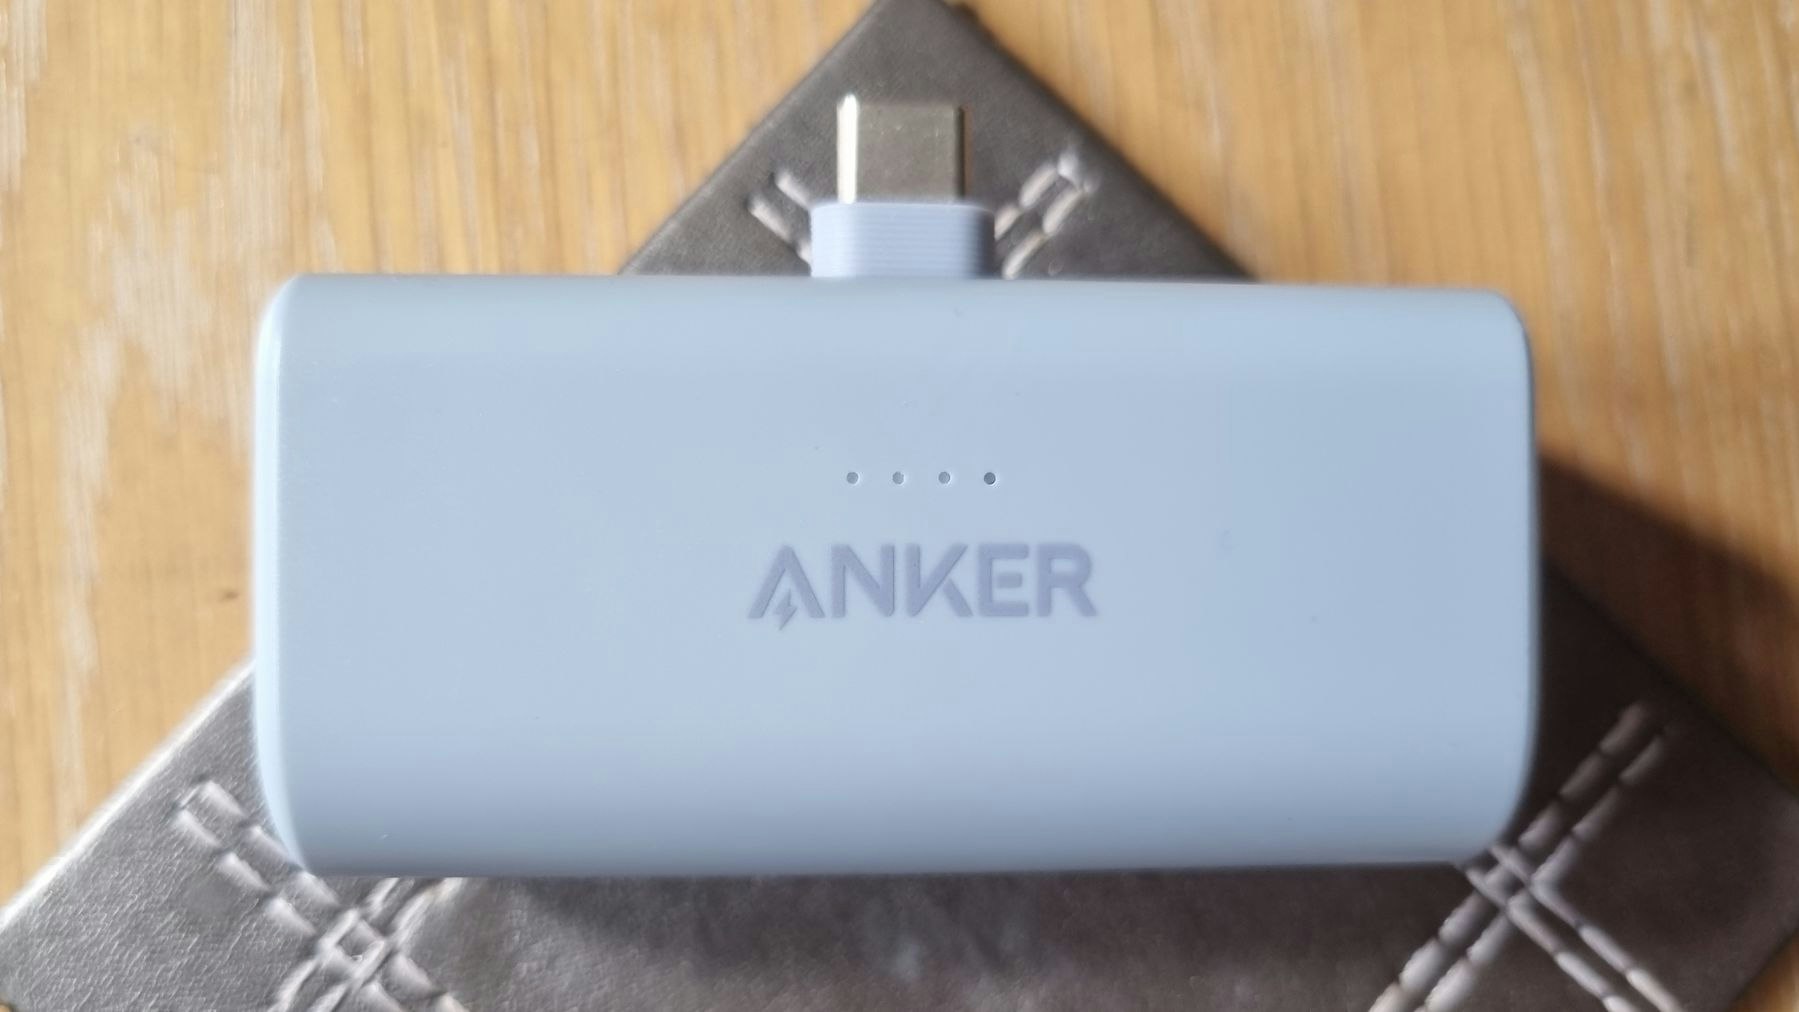 Review of 'Anker Nano Power Bank (22.5W, Built-In USB-C Connector